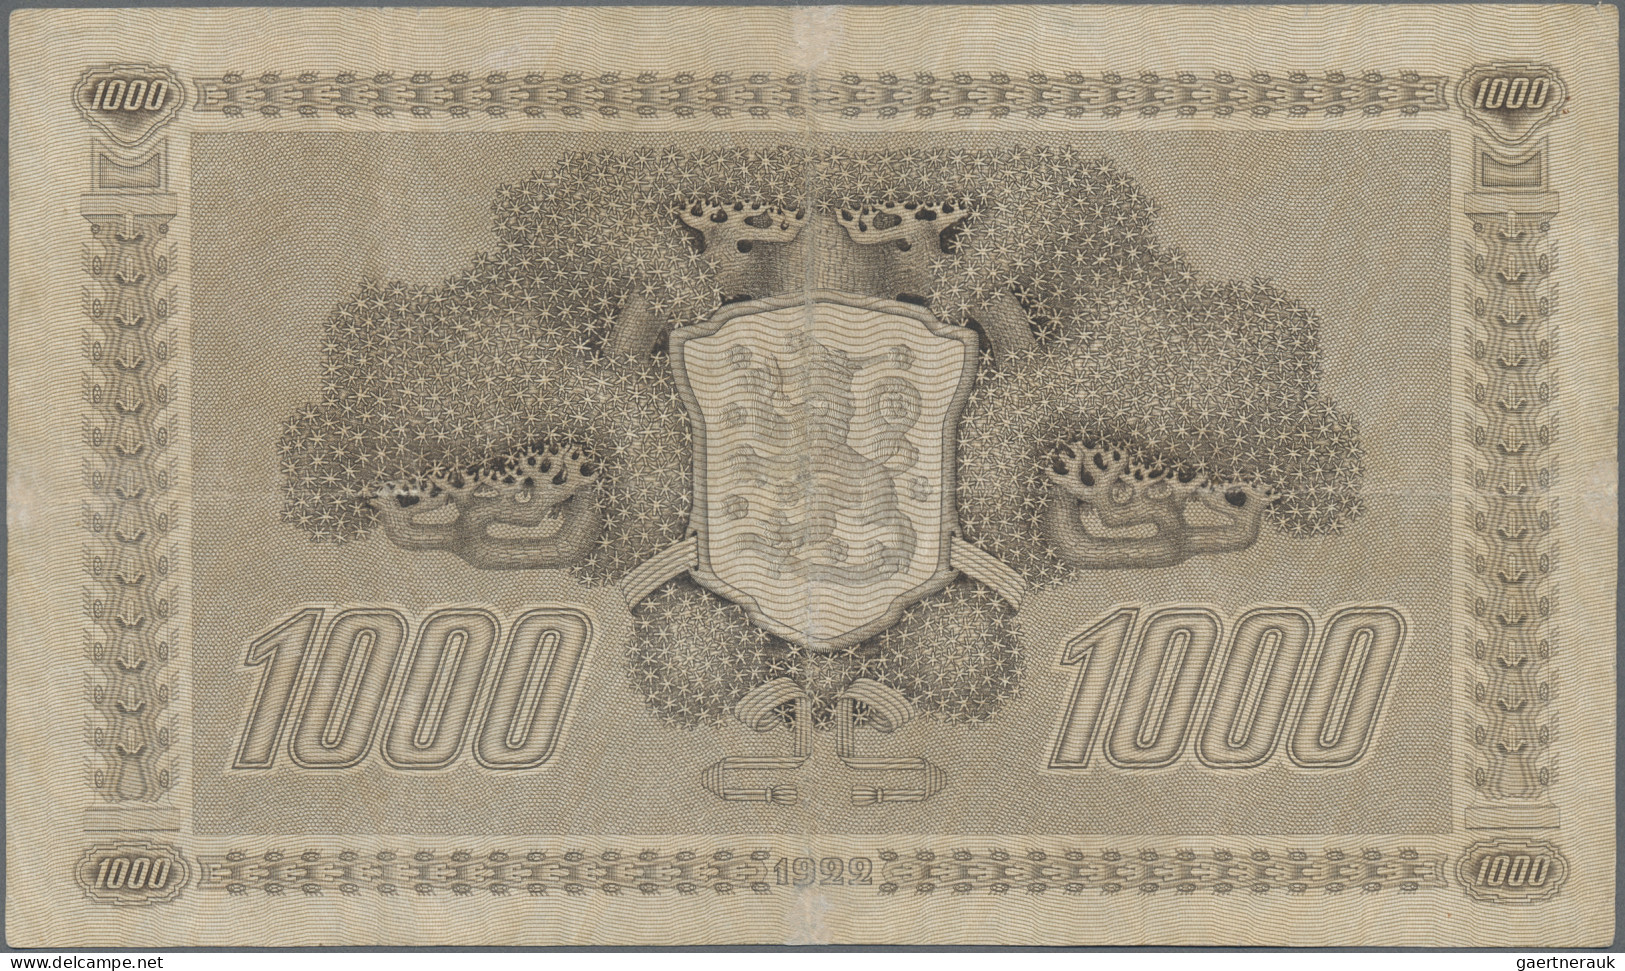 Finland: Finlands Bank, very nice lot with 6 banknotes, series 1909-1935, compri